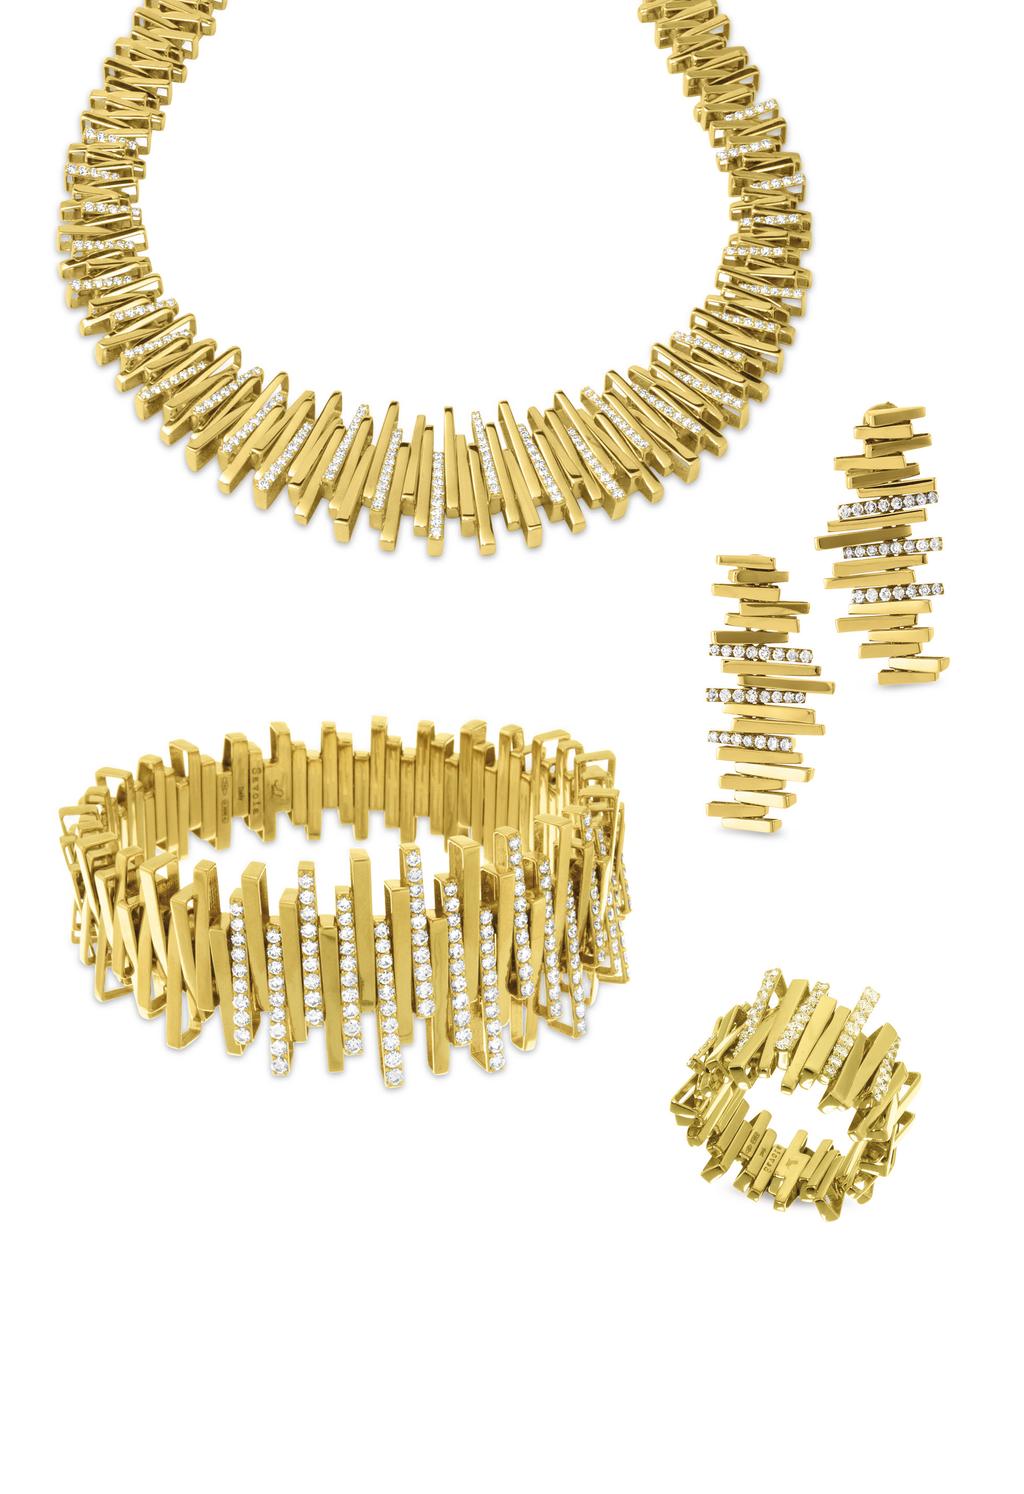 . 18kt yellow gold necklace from the rena ollection 4.